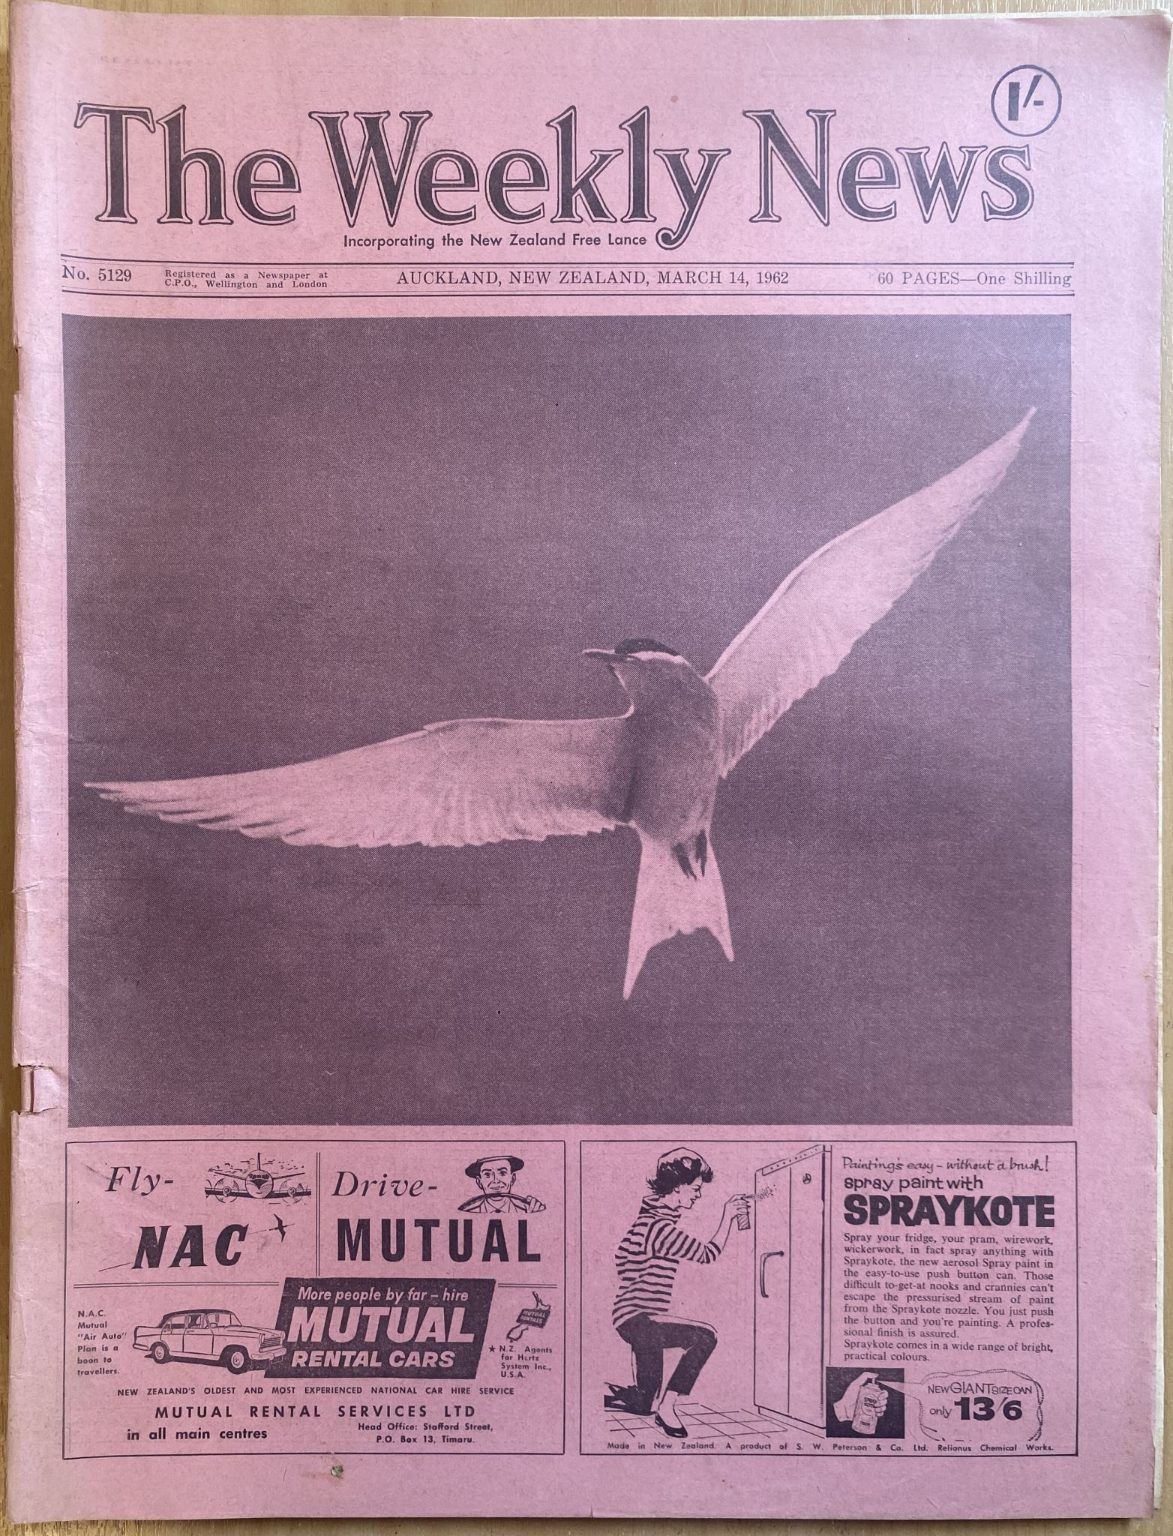 OLD NEWSPAPER: The Weekly News, No. 5129, 14 March 1962